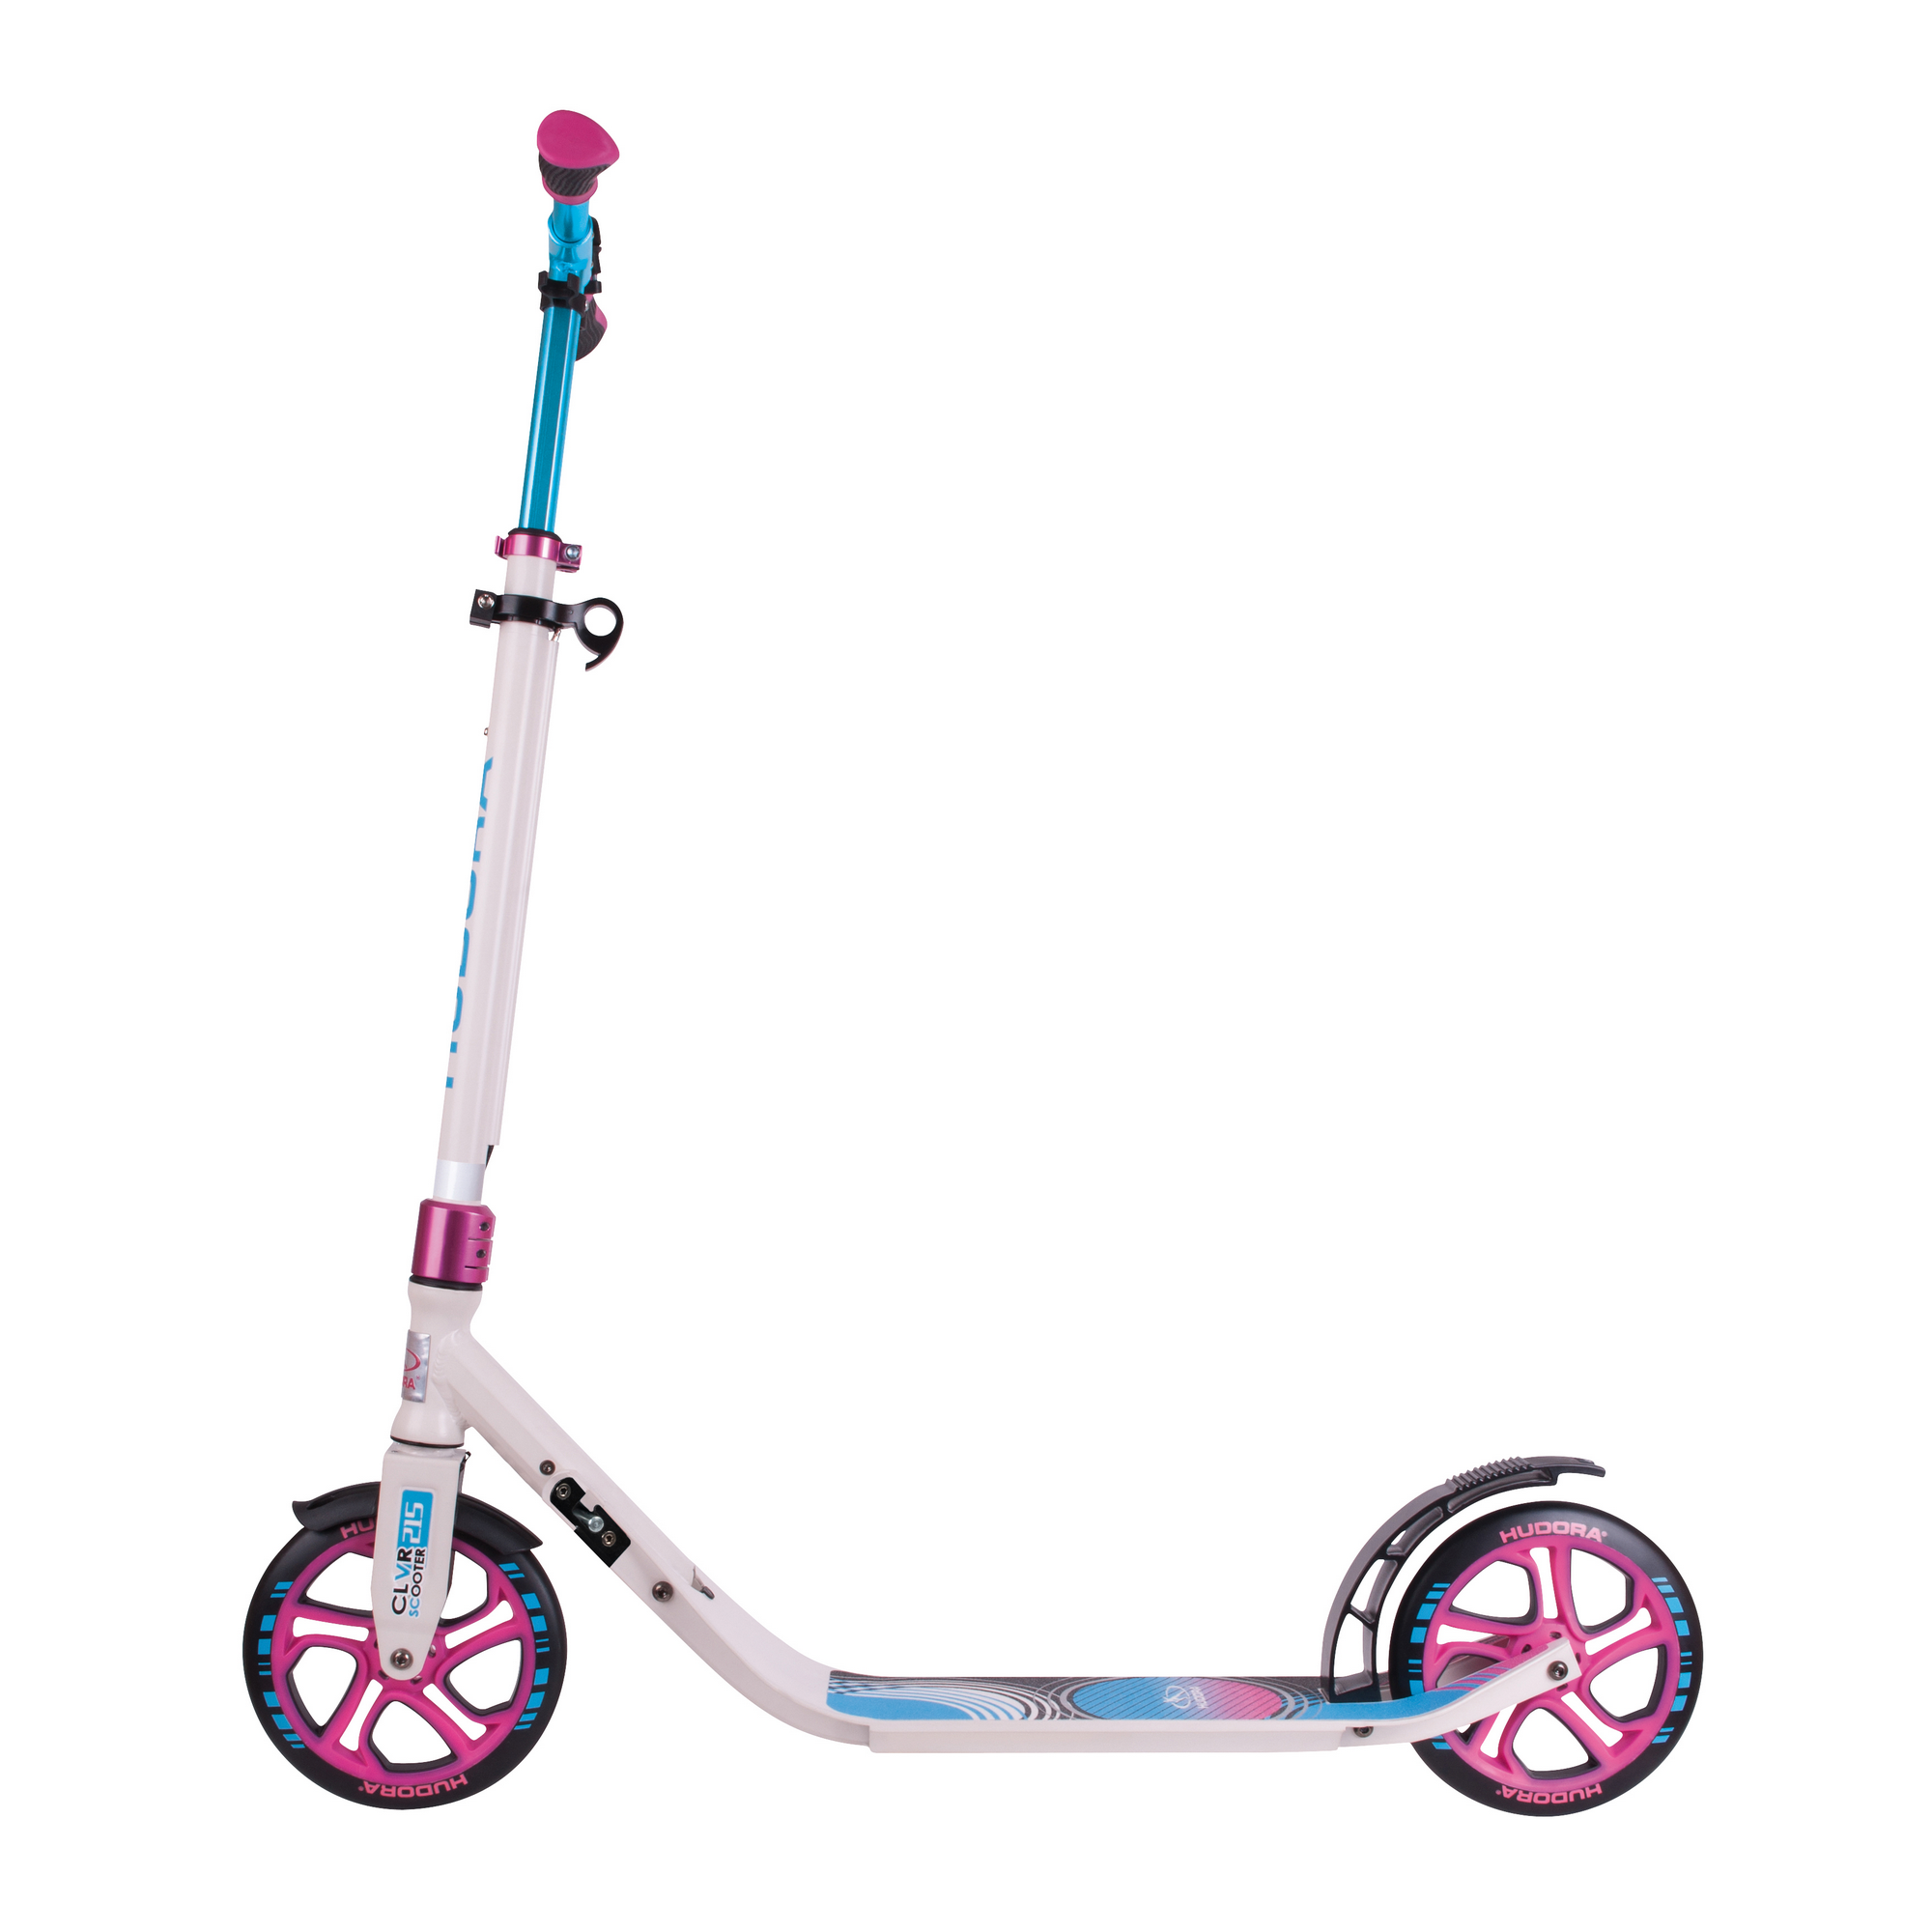 Scooter CLVR 215, blau/pink + product picture